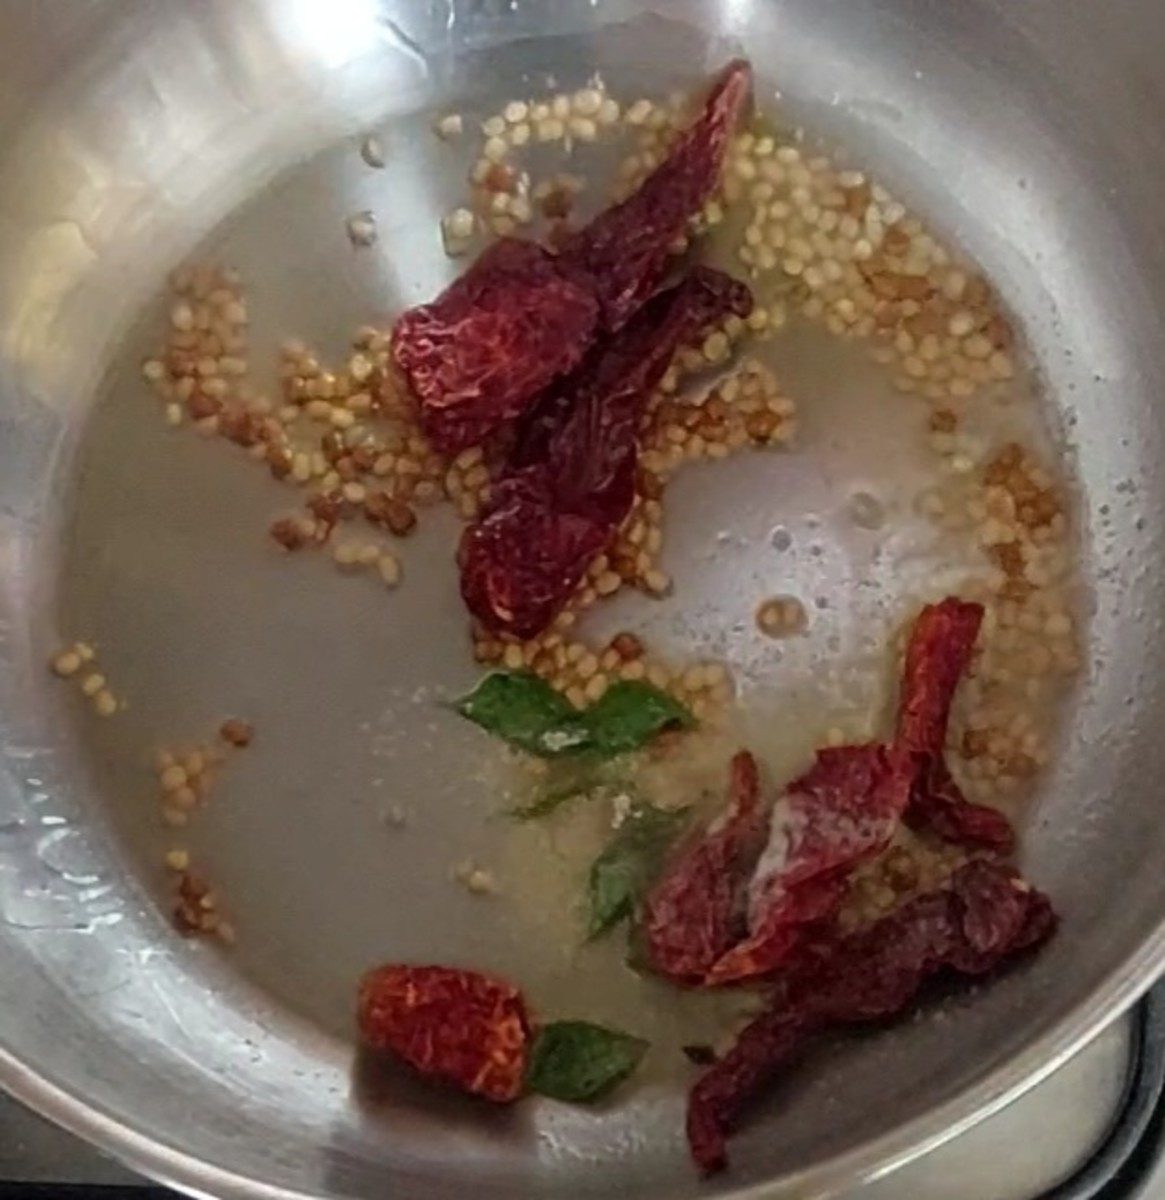 Add 4-5 byadagi red chilies and saute for a few seconds. Add a sprig of curry leaves and 1/4 teaspoon hing. Fry for a few seconds.